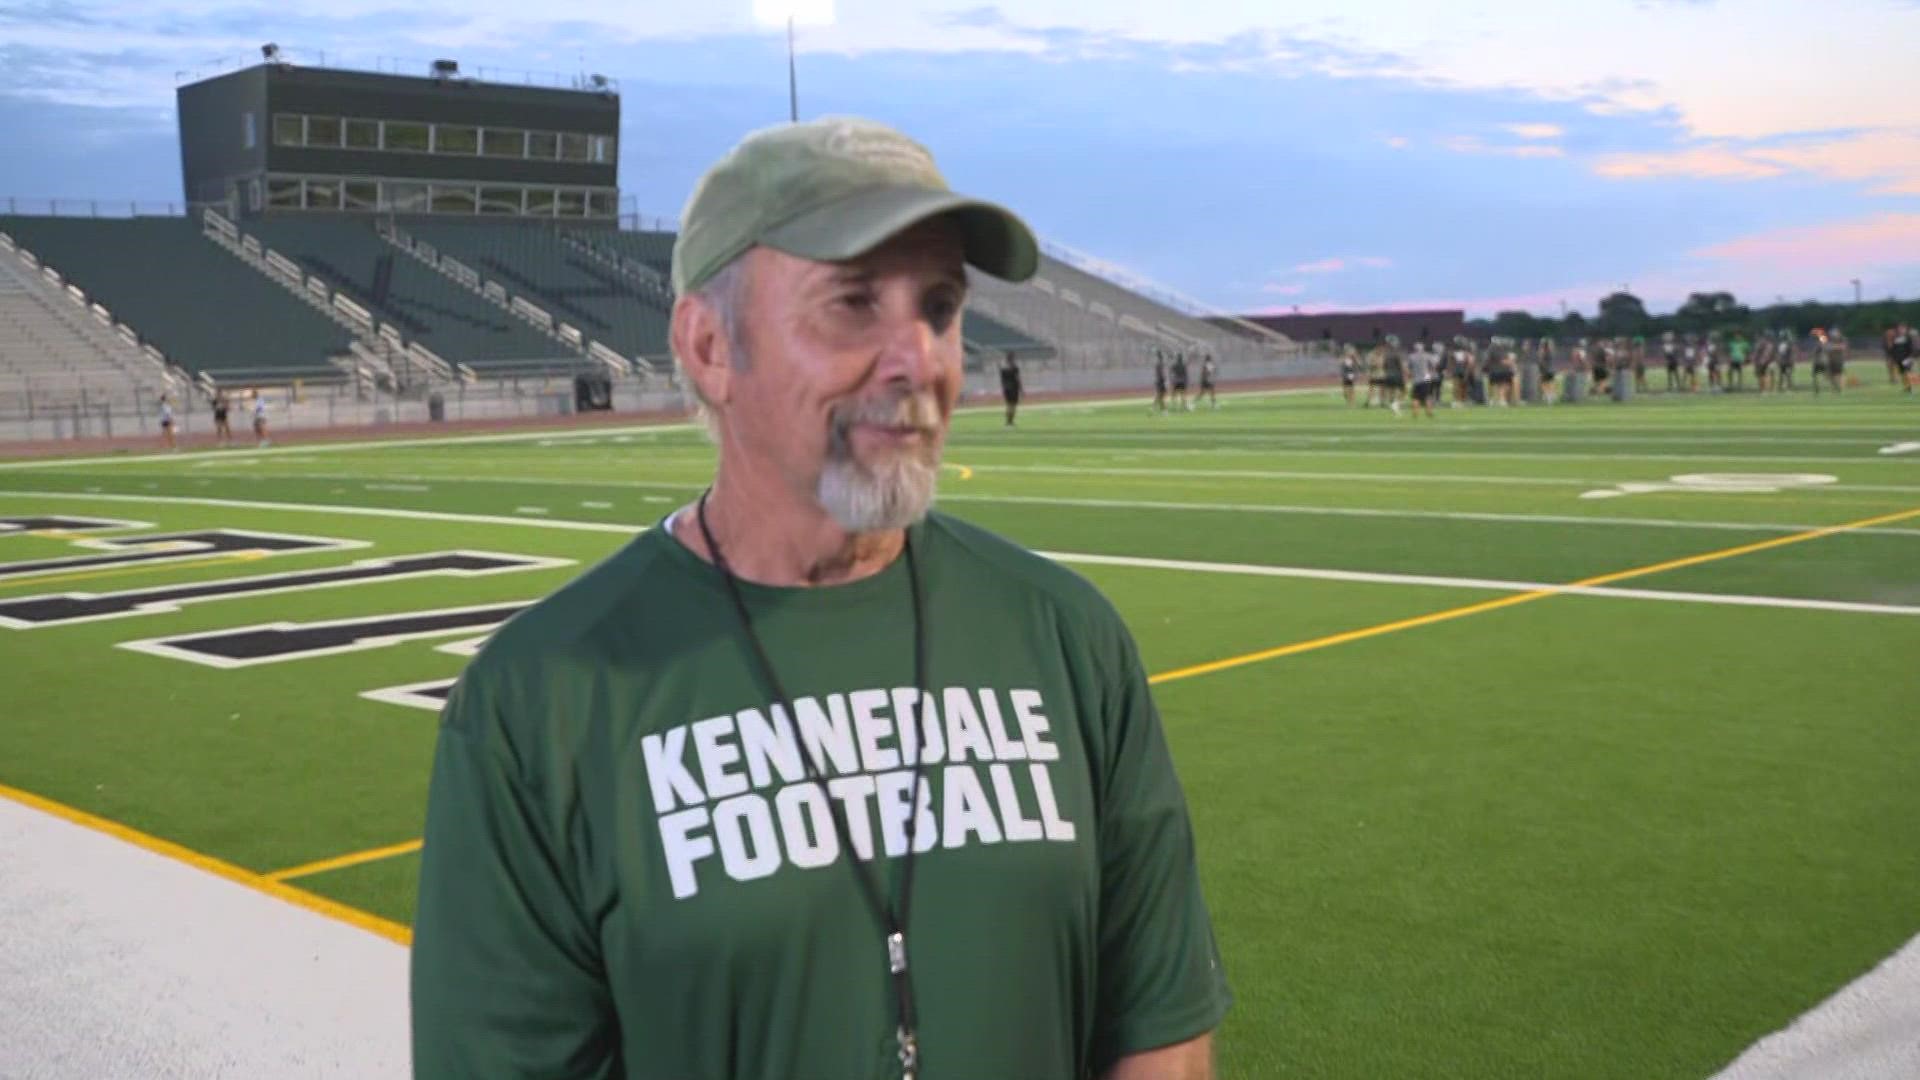 Kennedale is among the teams getting their practices started this week.